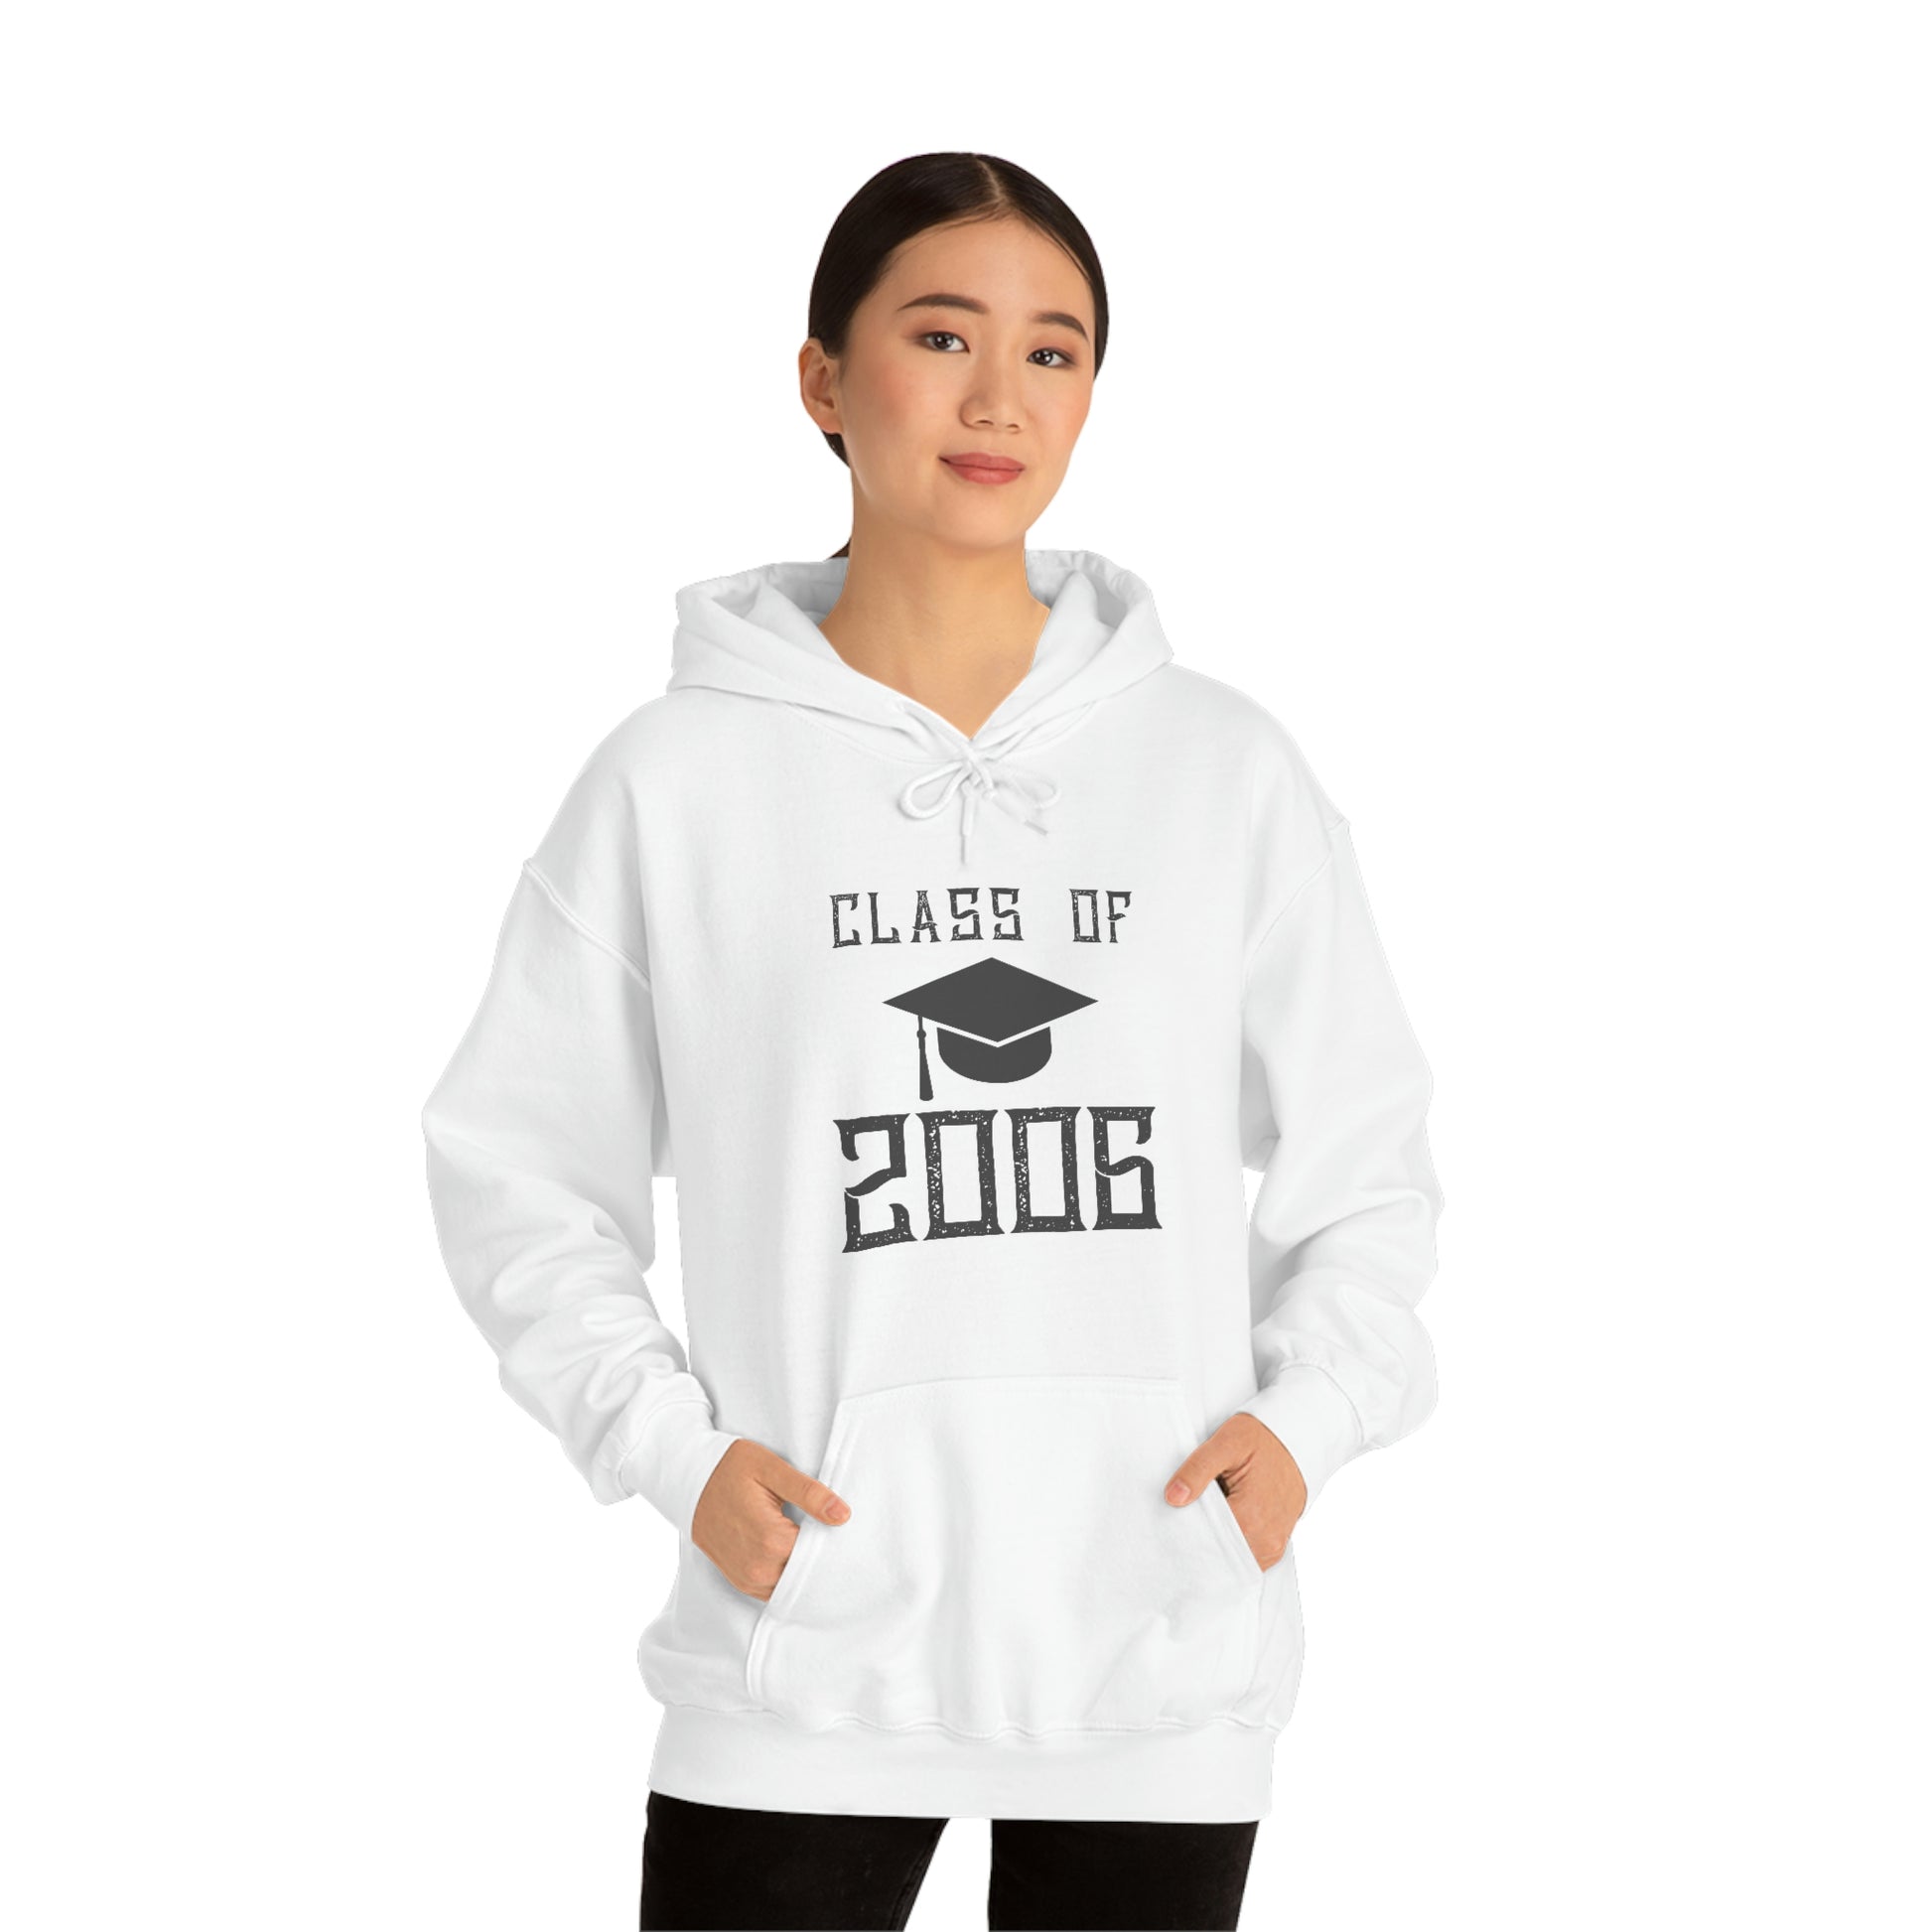 "Class Of 2006" Hoodie - Weave Got Gifts - Unique Gifts You Won’t Find Anywhere Else!